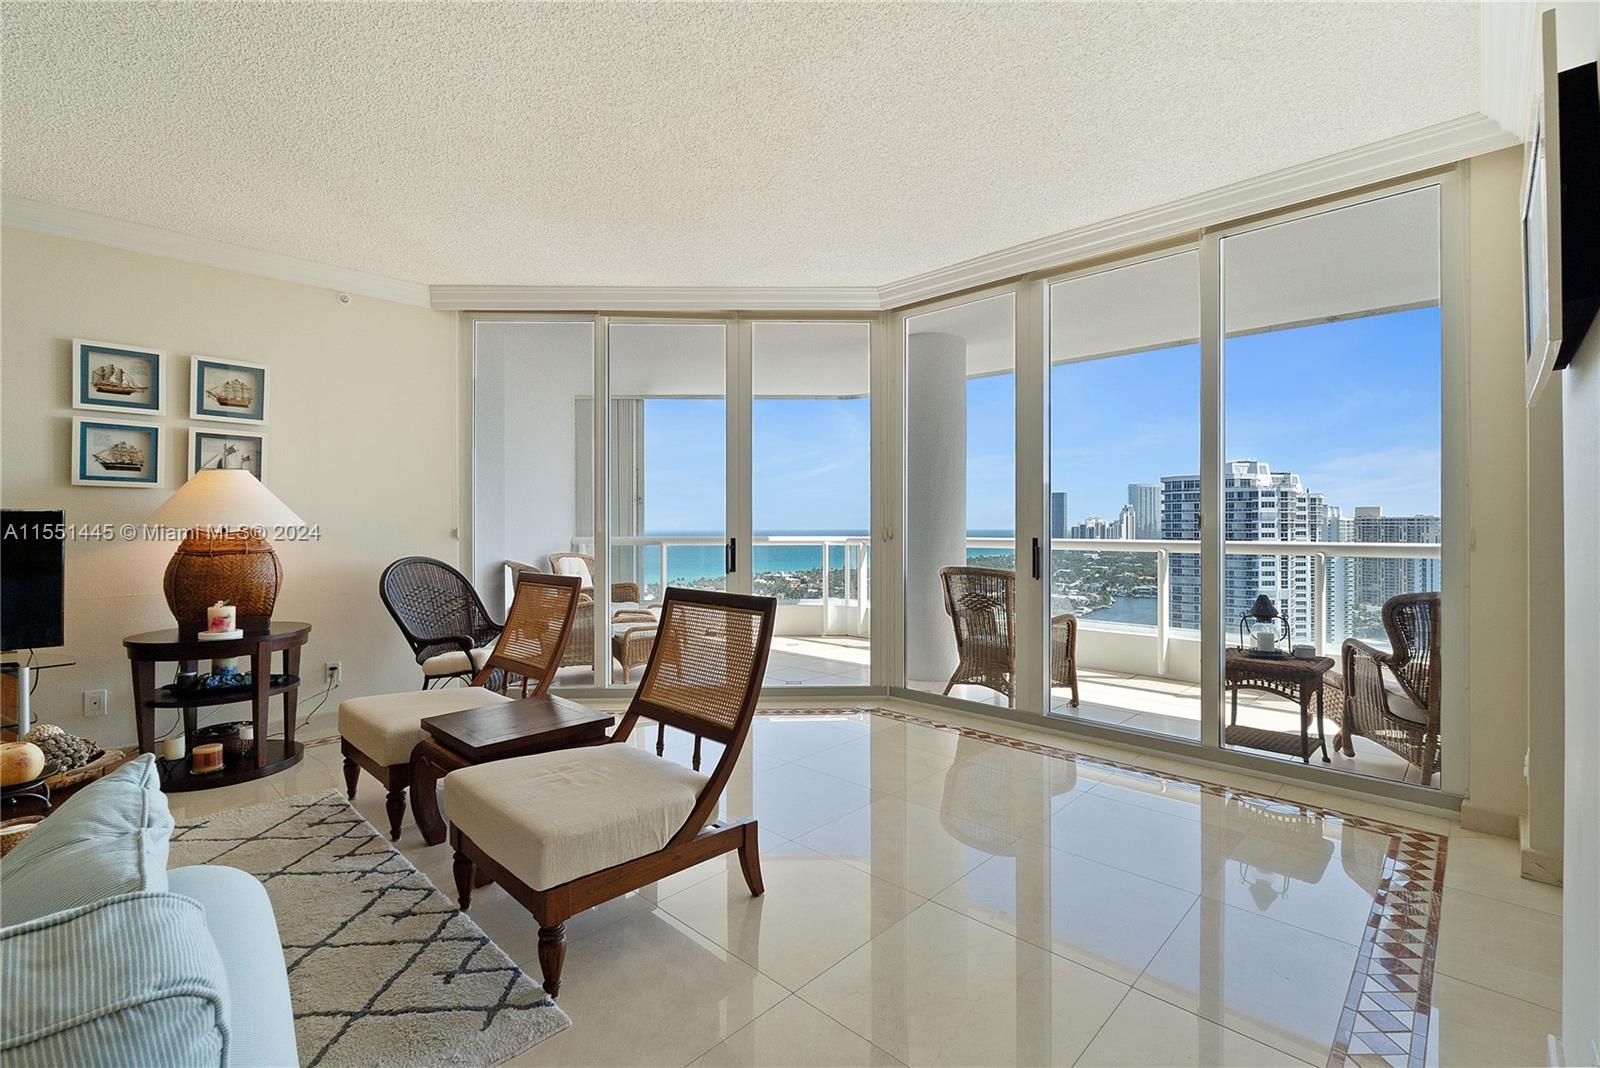 Property for Sale at 21050 Point Pl Pl 2702, Aventura, Miami-Dade County, Florida - Bedrooms: 3 
Bathrooms: 3  - $1,490,000